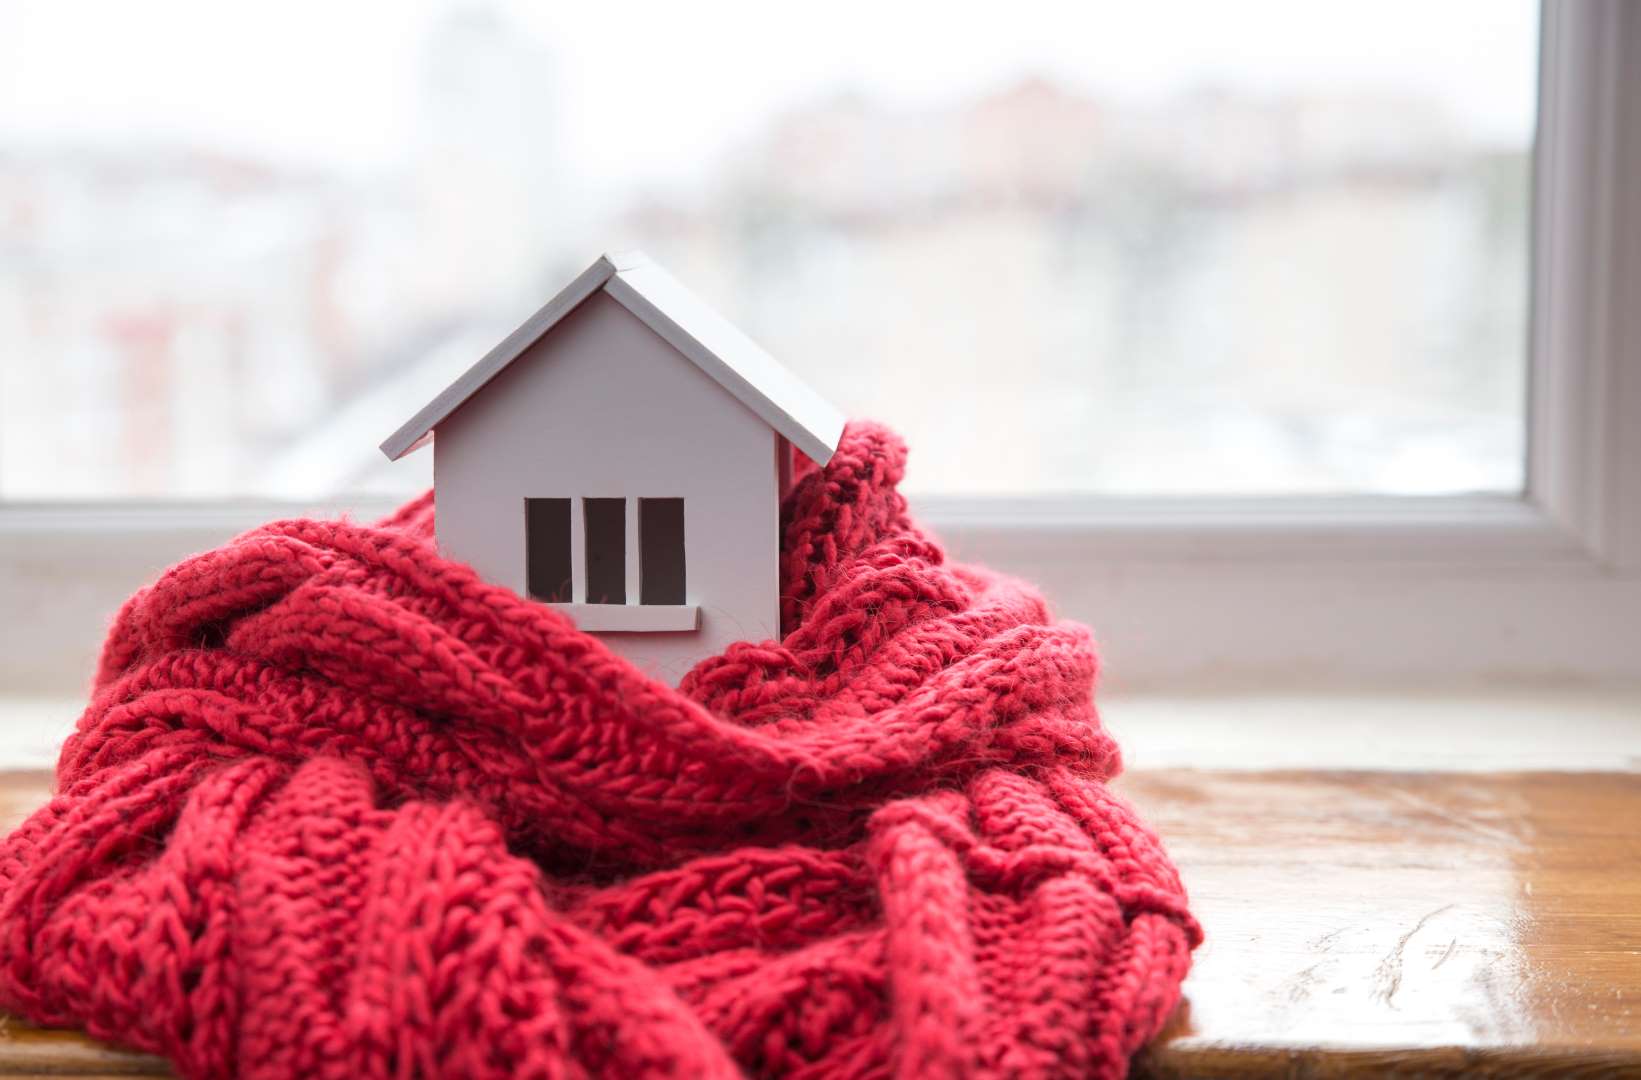 How Does A Heat Pump Work In Winter?